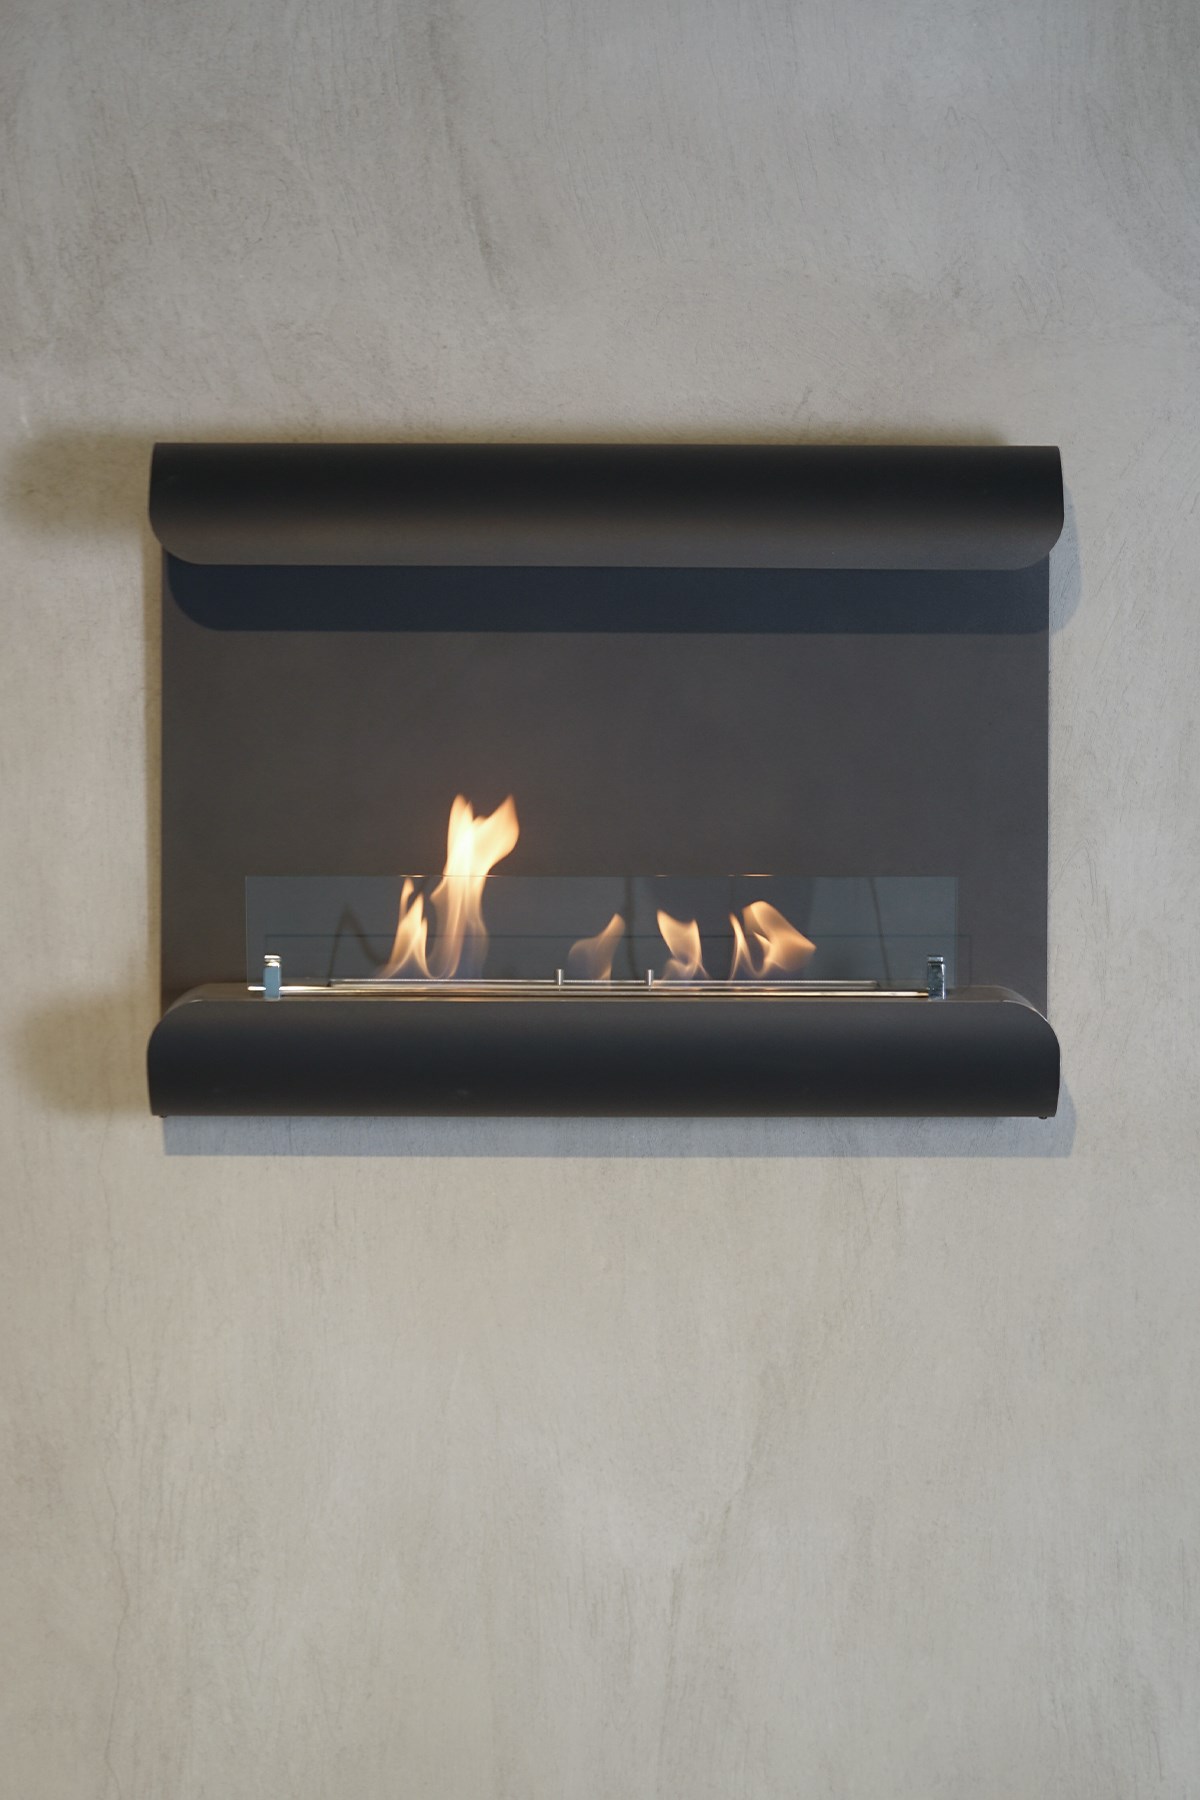 Wall type fireplaces from Turkey with brand 'Korflame'